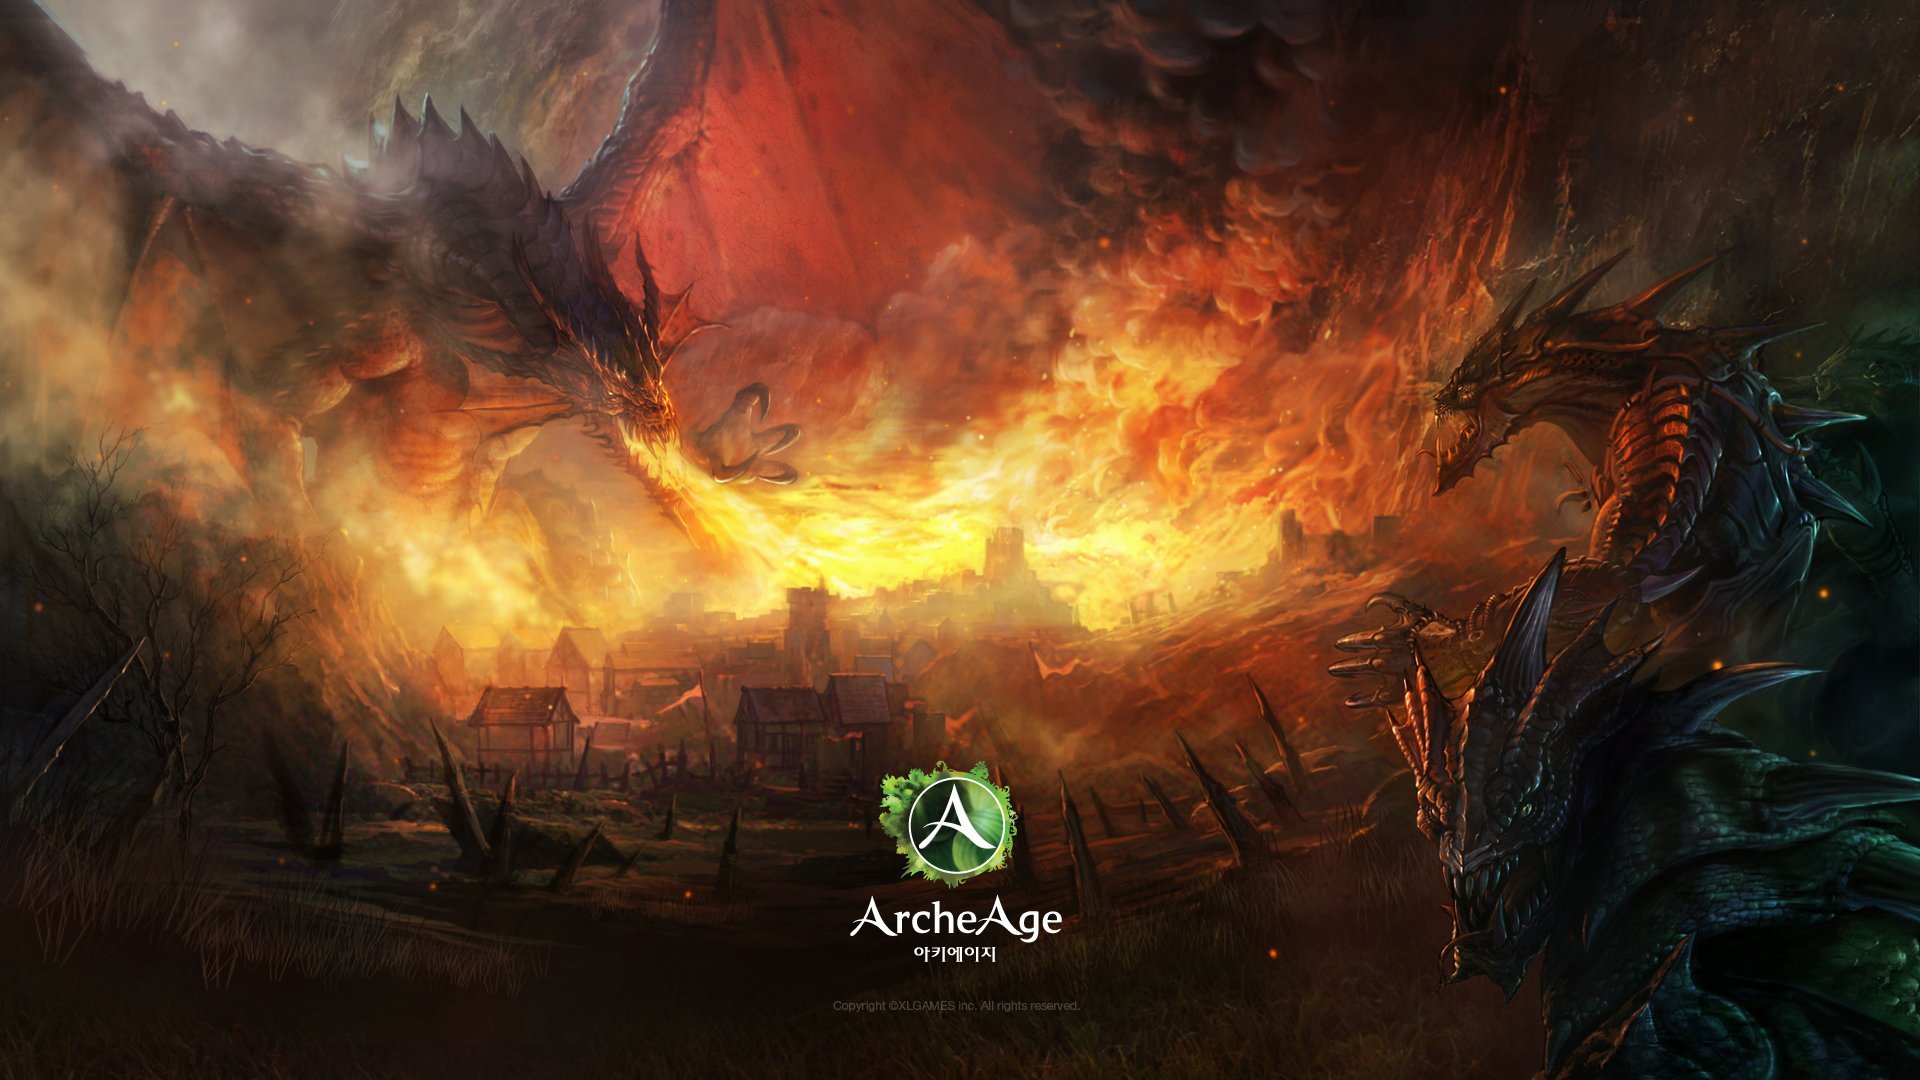 Archeage Mmorpg Online Game Art Creatures Dragon Fire House In